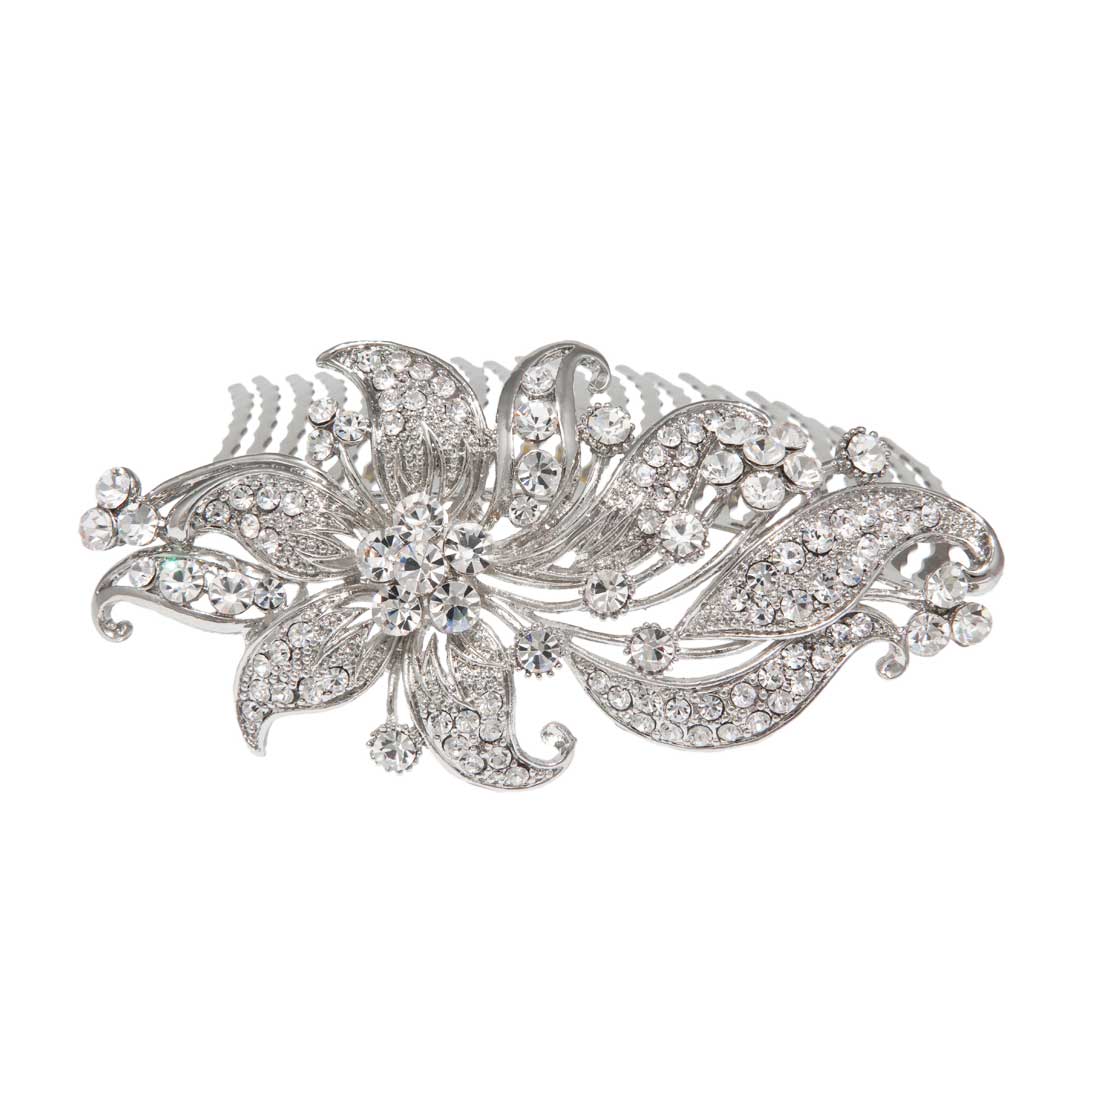 Nostalgic Extravagance Large Silver Crystal Lily Bridal Hair Comb